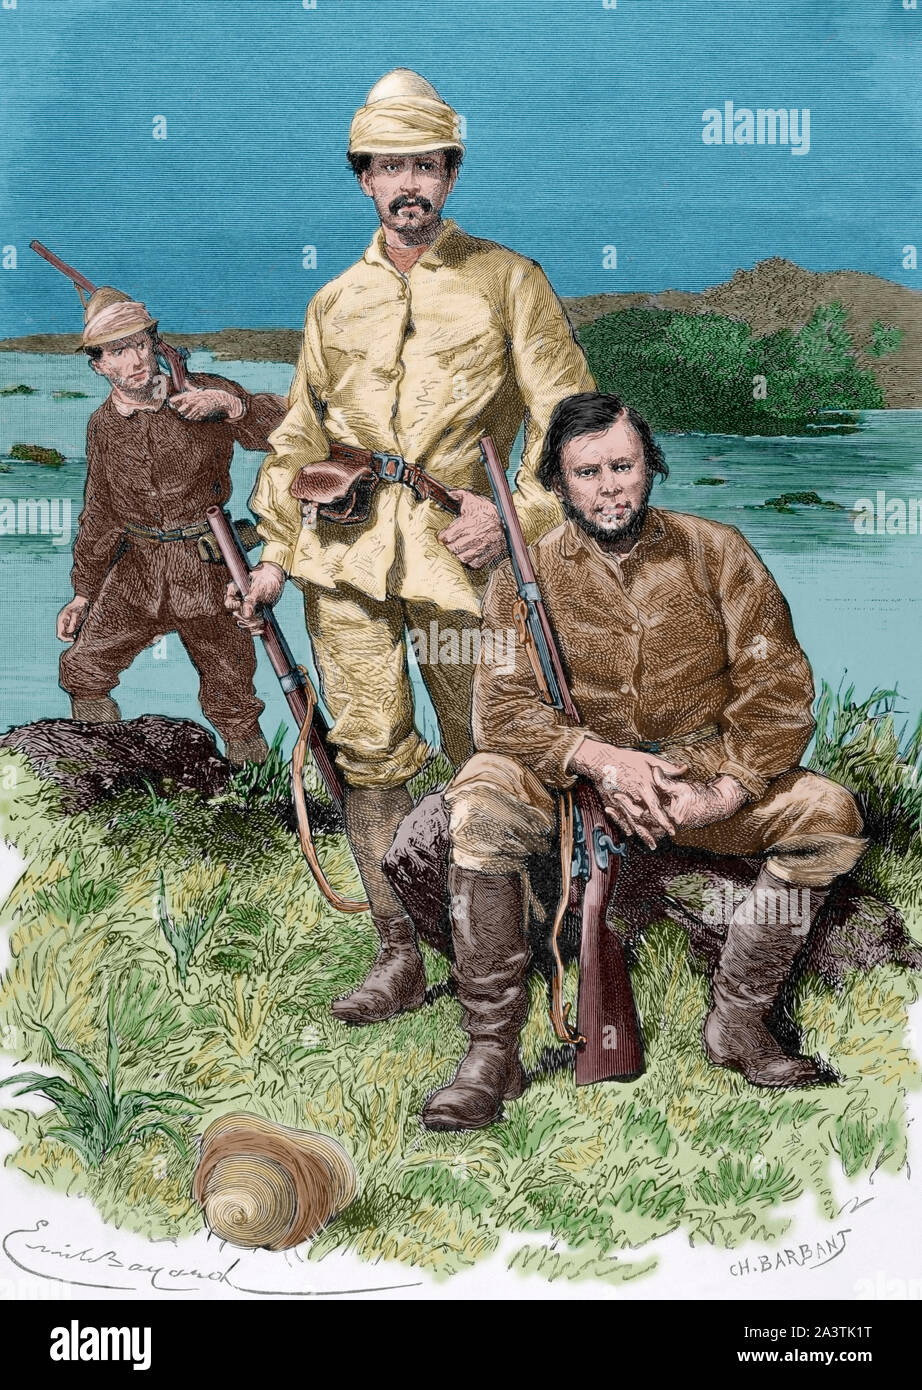 Africa. Members of Stanley's expedition. Edward Pocock, Francis Pocock and Frederick Barker. Illustrated by Emile Bayard. Engraving by Charles Barbant. Africa inexplorada, el Continente Misterioso by Henry Morton Stanley, c. 1887. Later colouration. Stock Photo